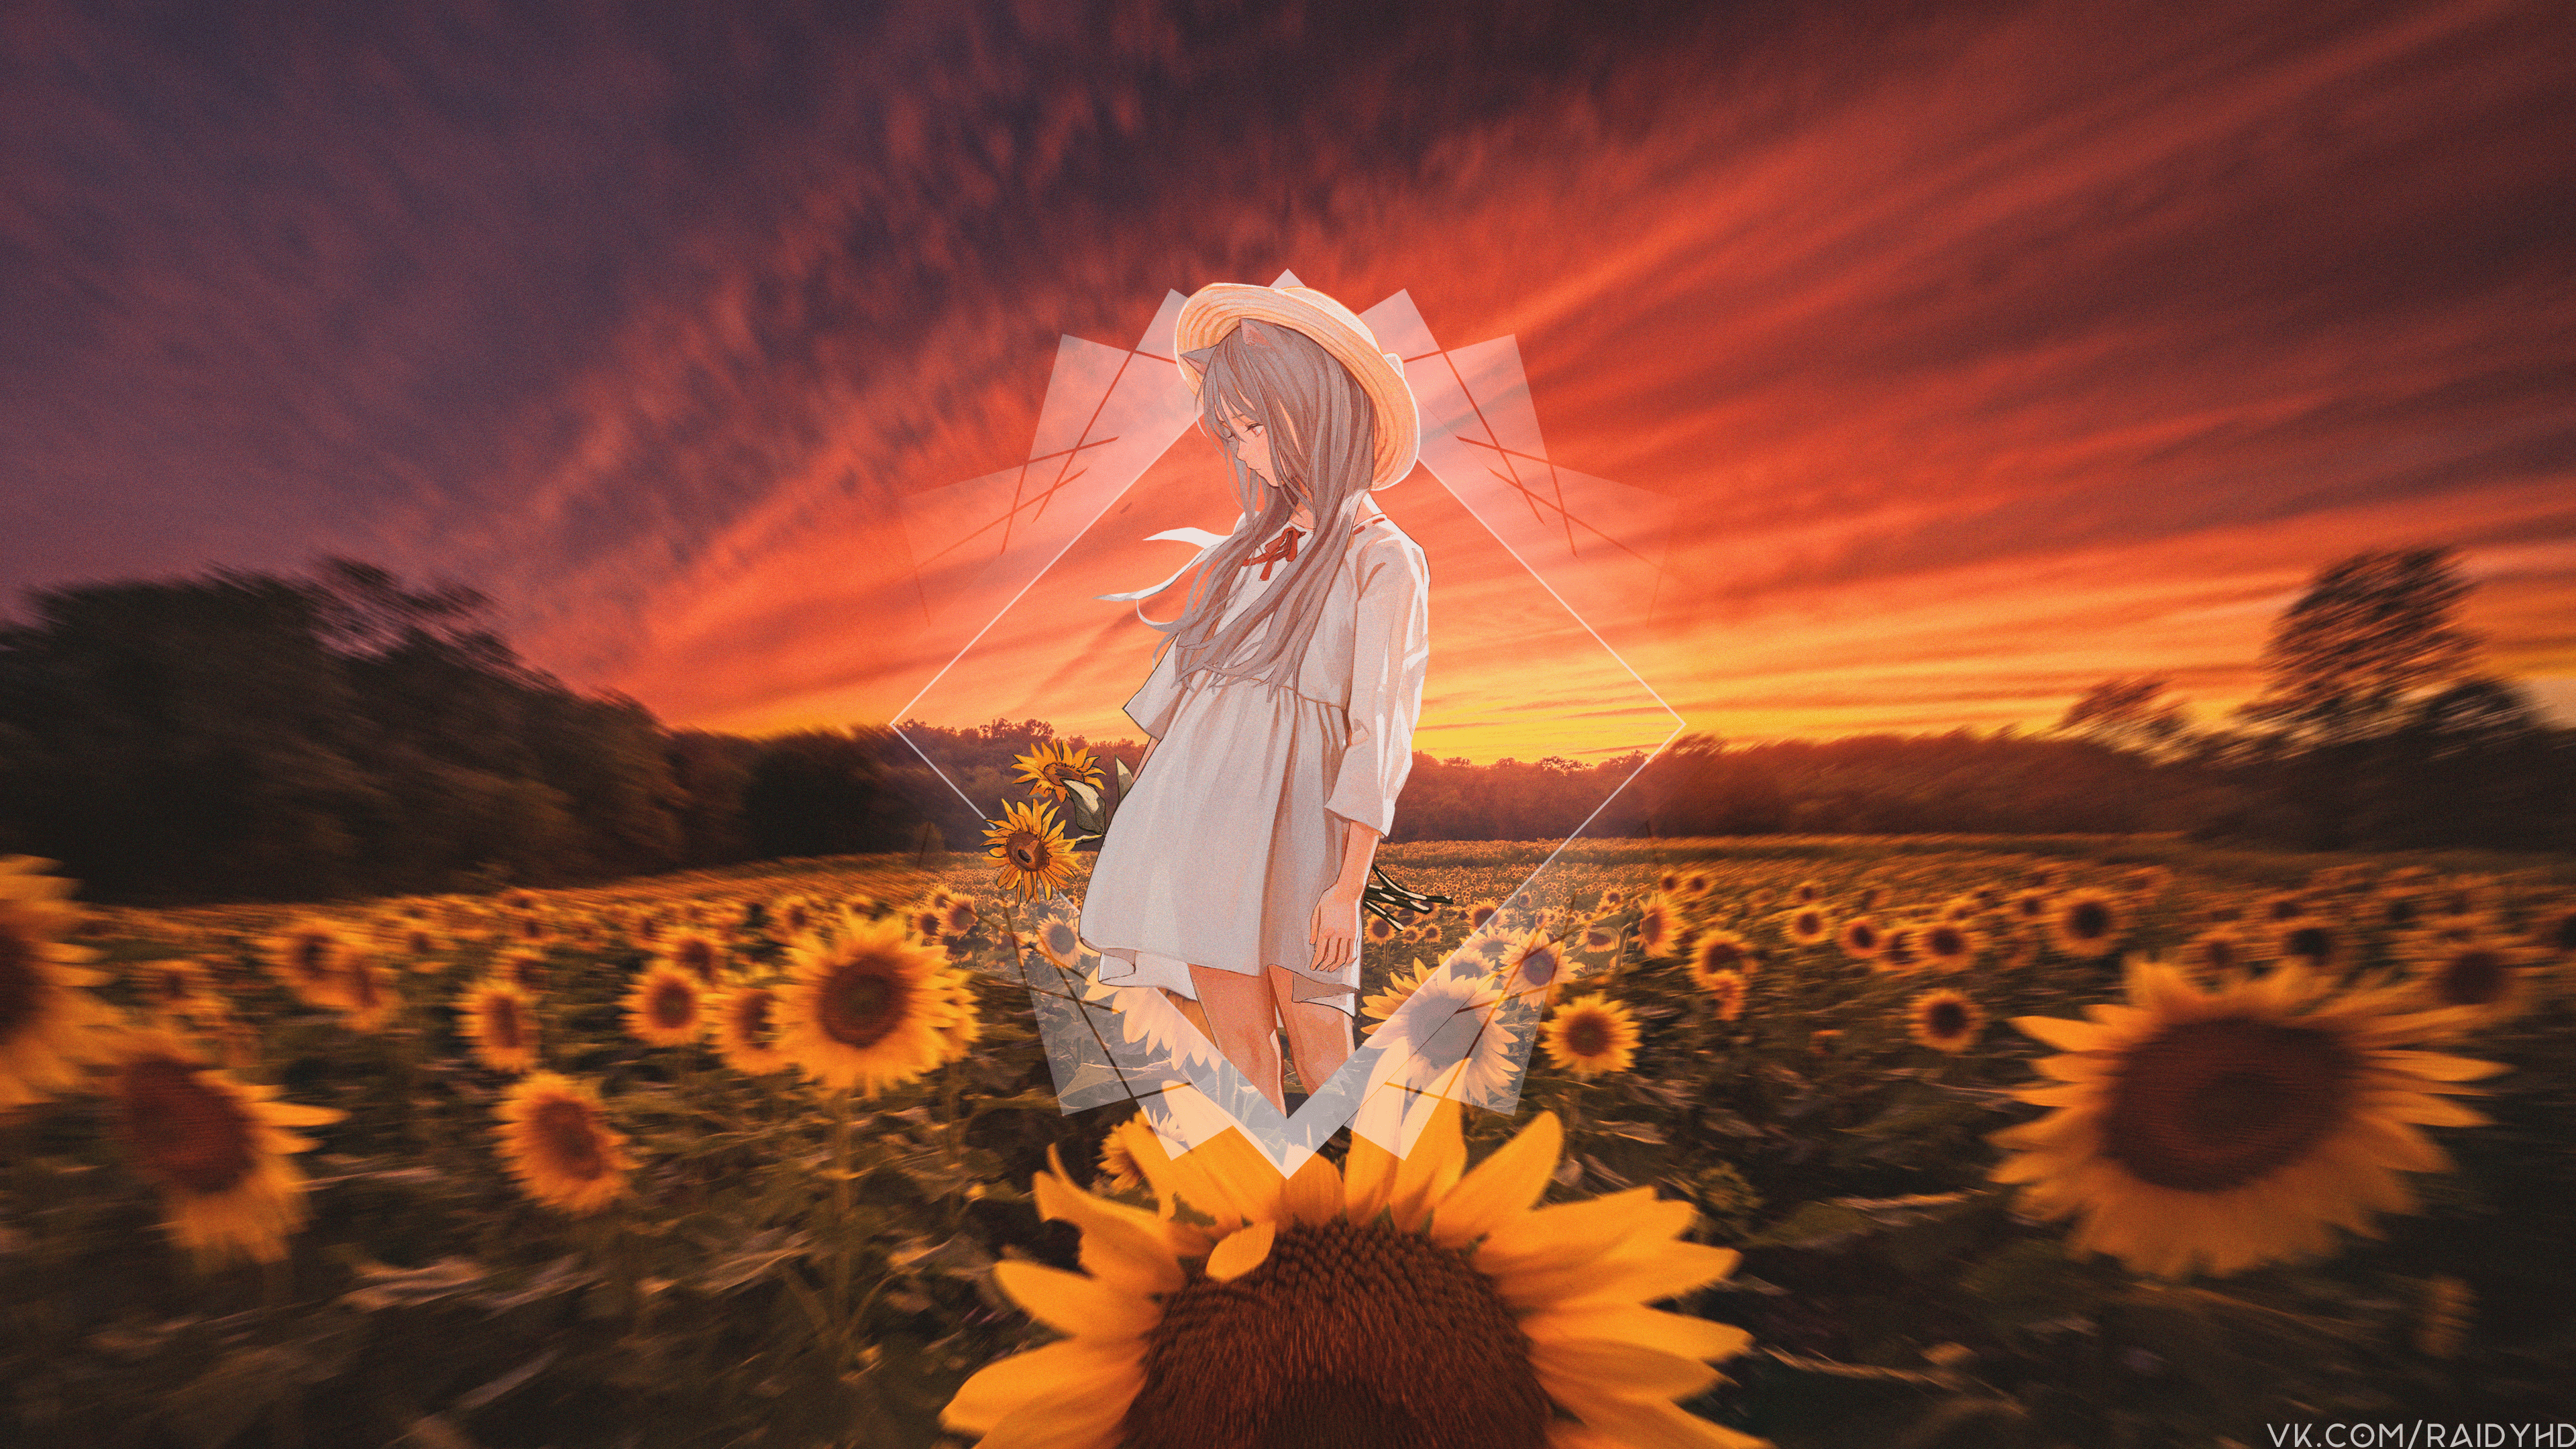 Anime 3840x2160 anime anime girls picture-in-picture sunflowers sunset